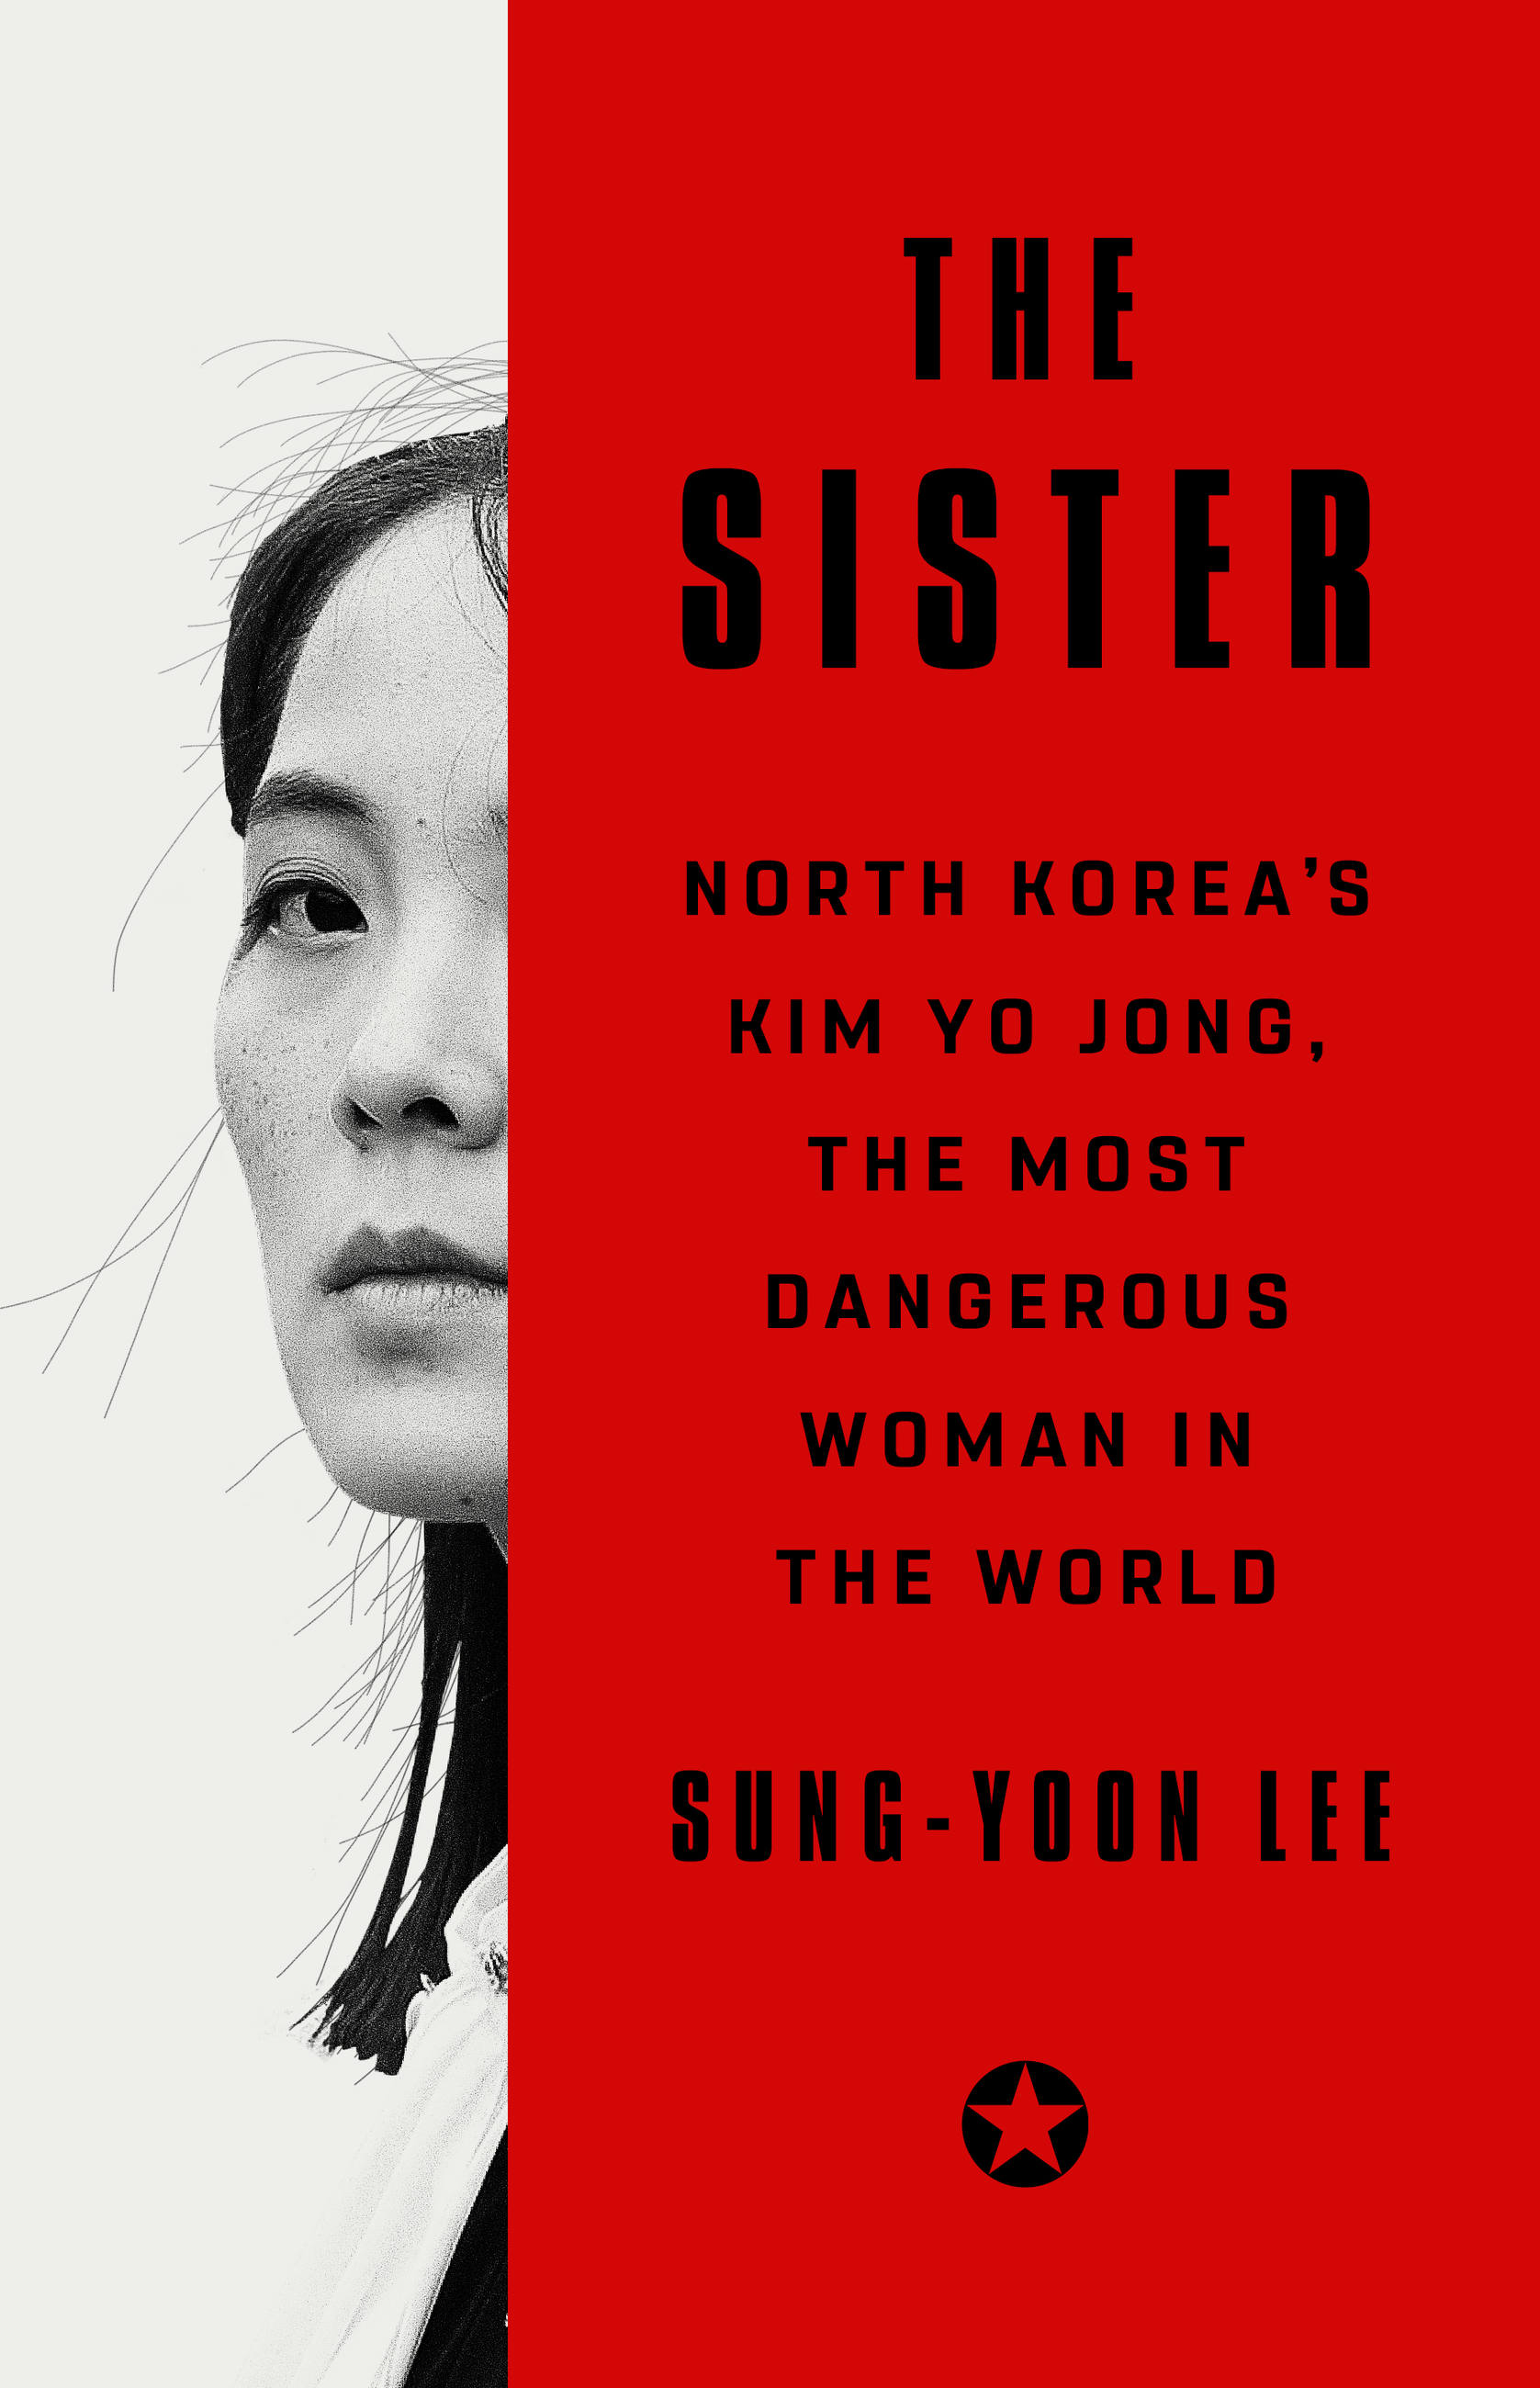 Junior League author, freed from North Korea, owes much to sibling, Books